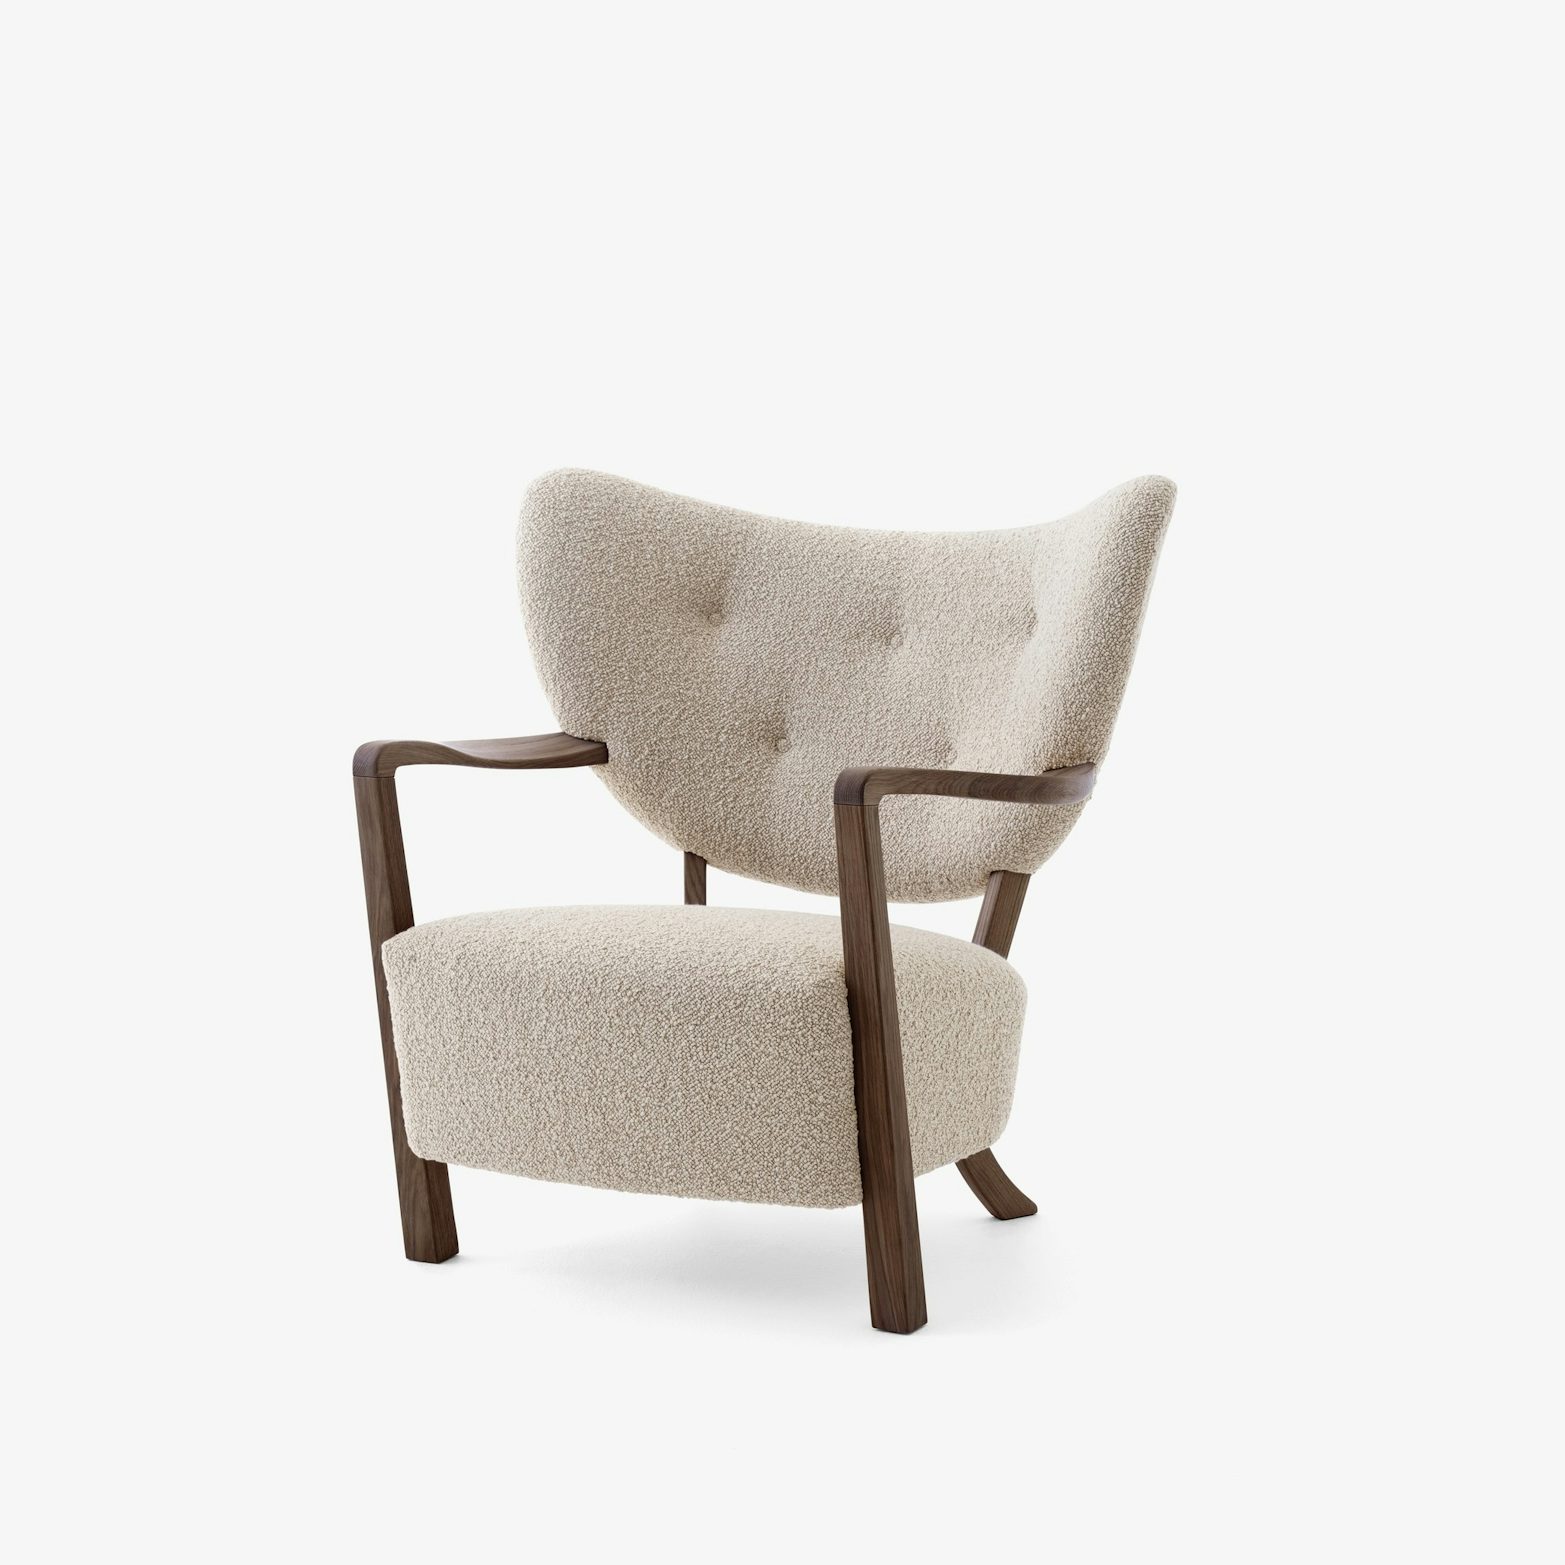 Wulff lounge chair andtradition 22